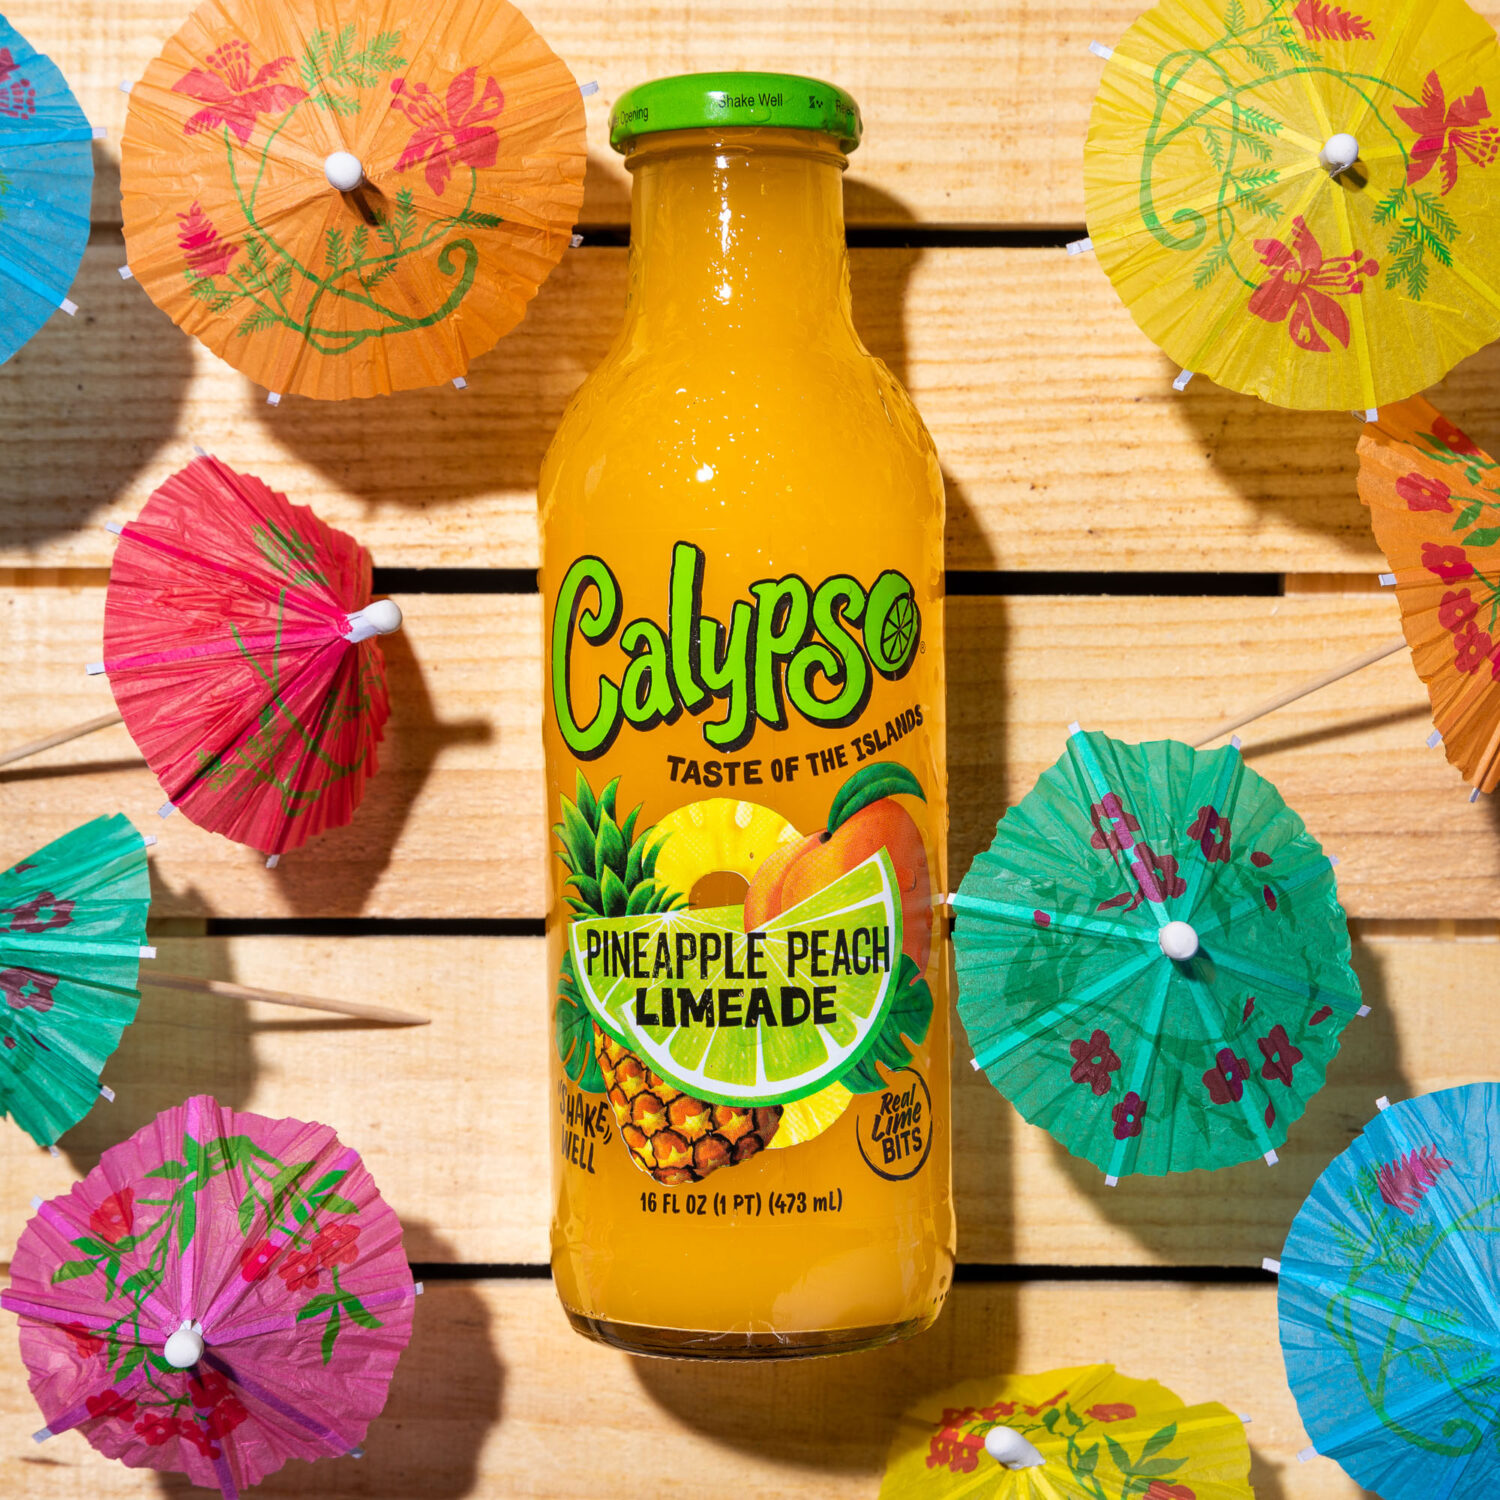 A bottle of Calypso Pineapple Peach Limeade next to umbrellas on a wooden table.